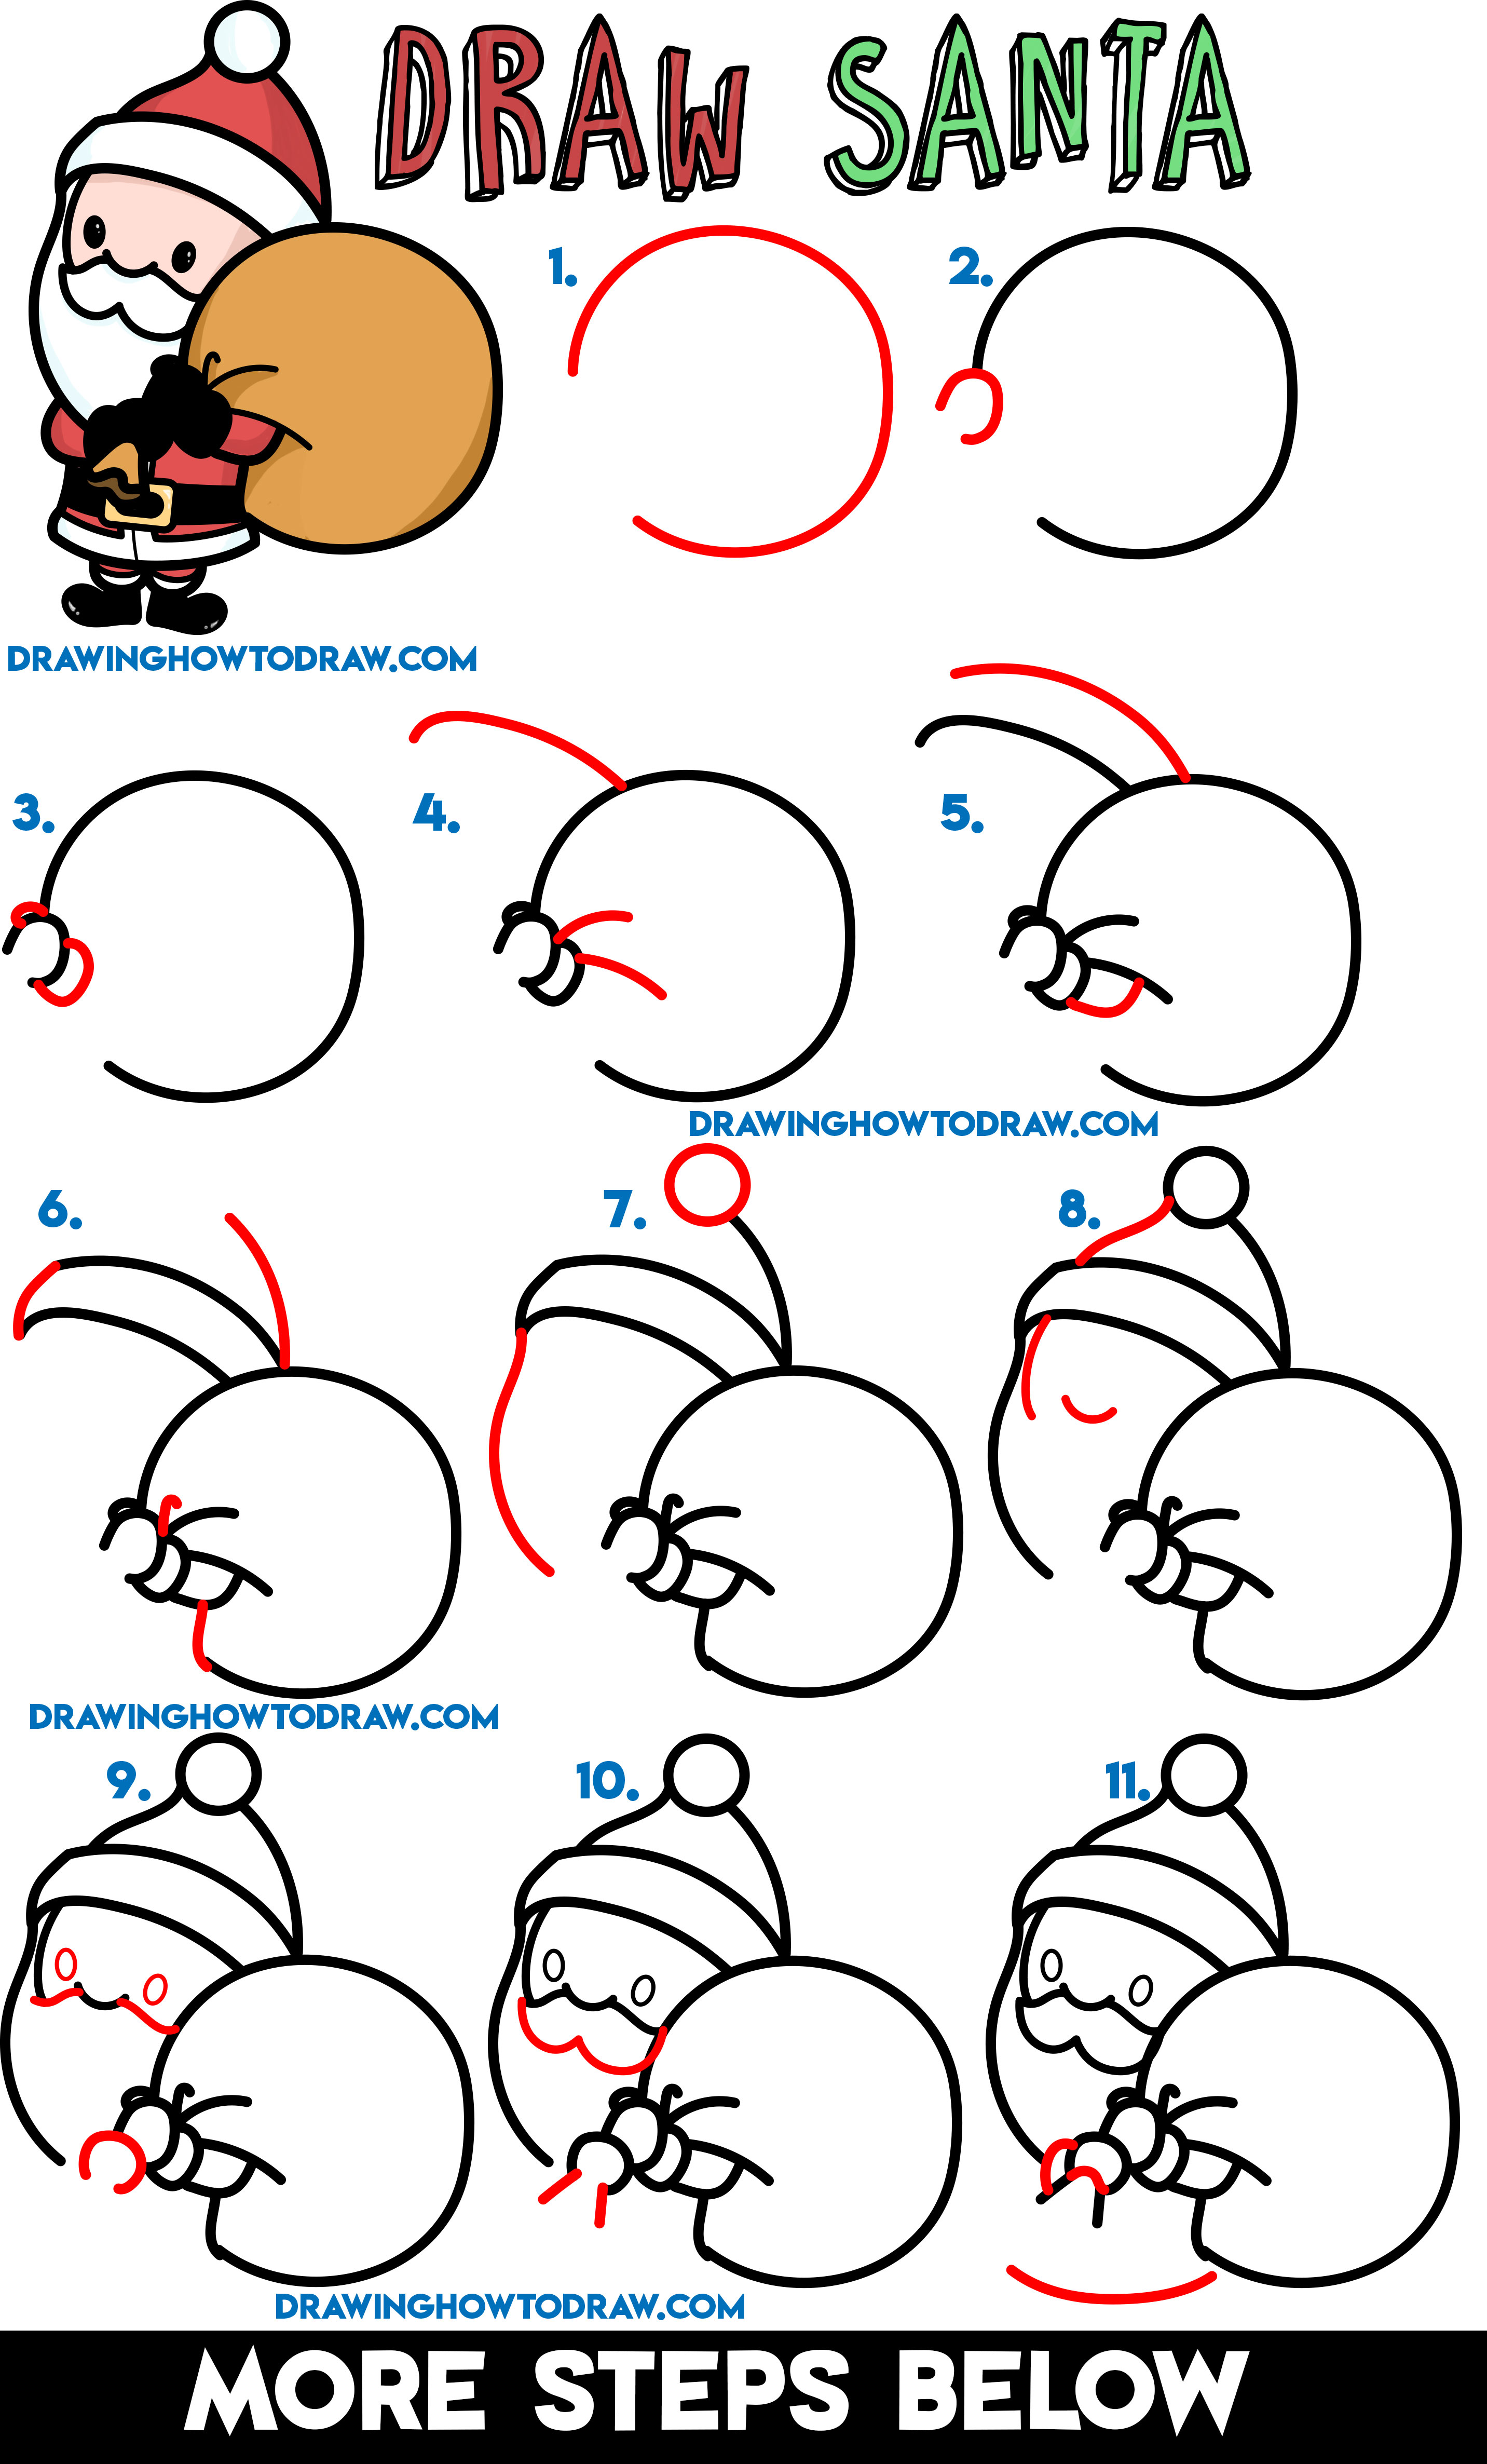 How to draw a super cute santa claus chibi easy step by step drawing tutorial for beginners